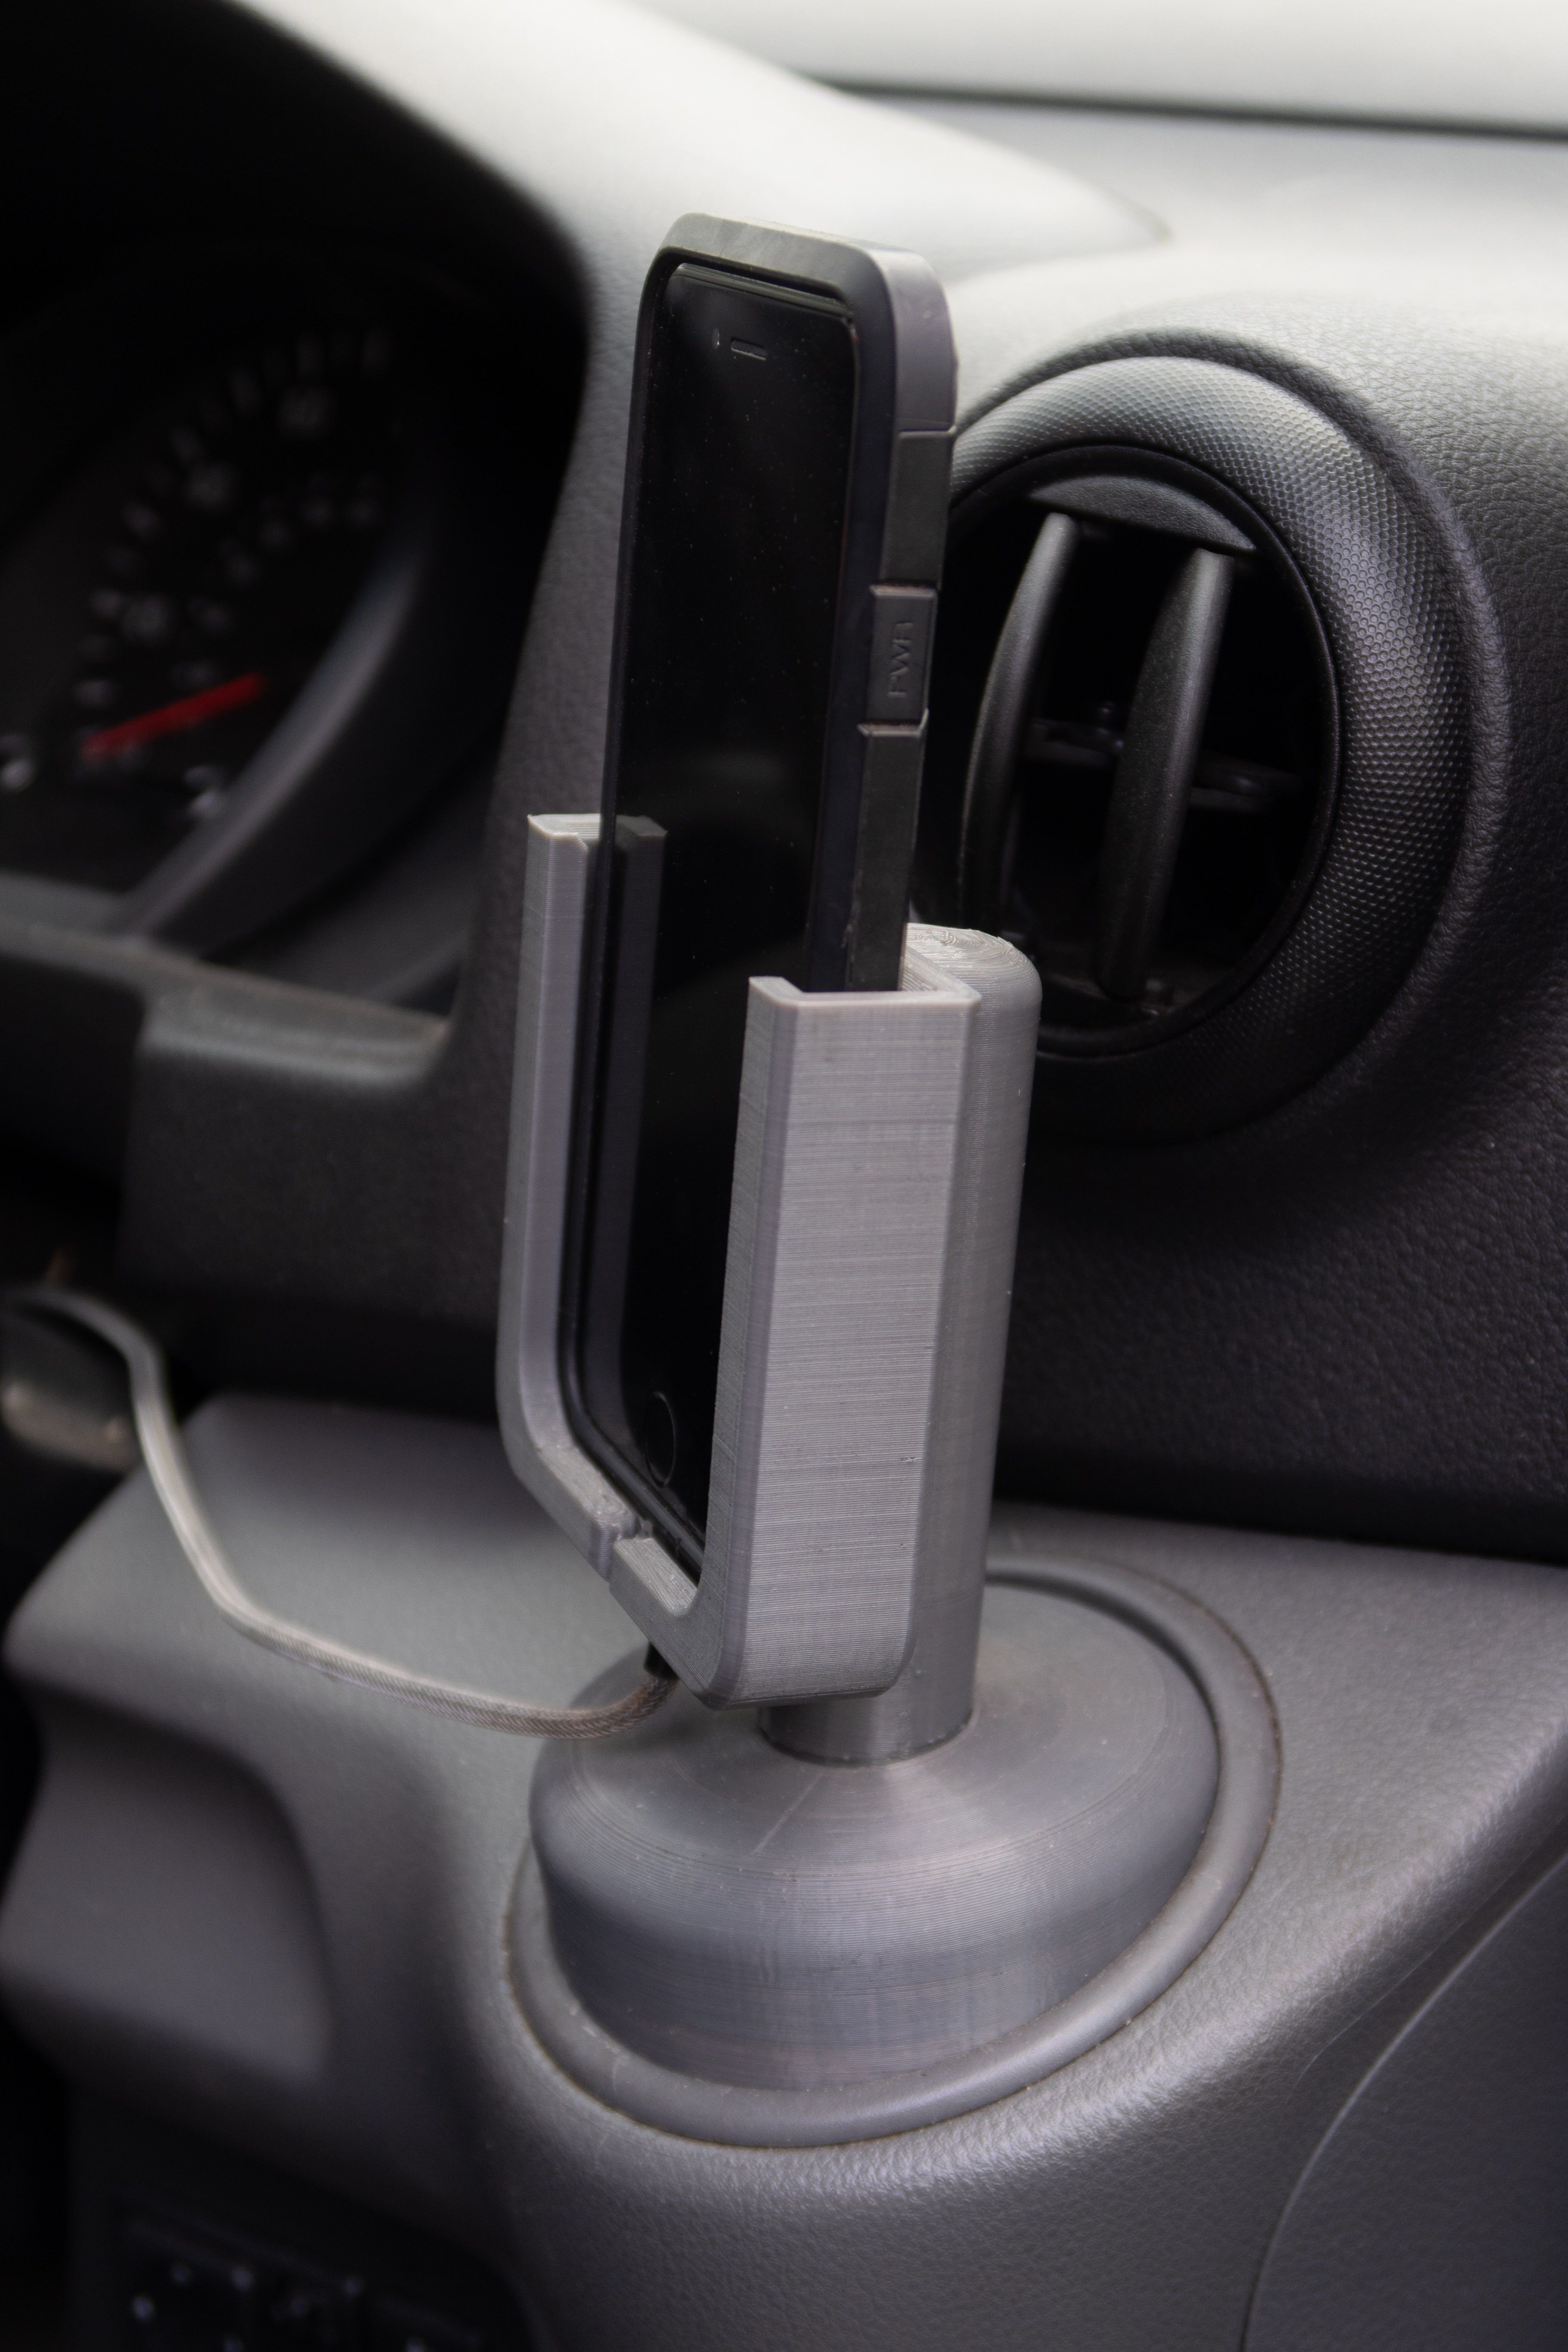 iPhone Cradle for the Nissan NV200